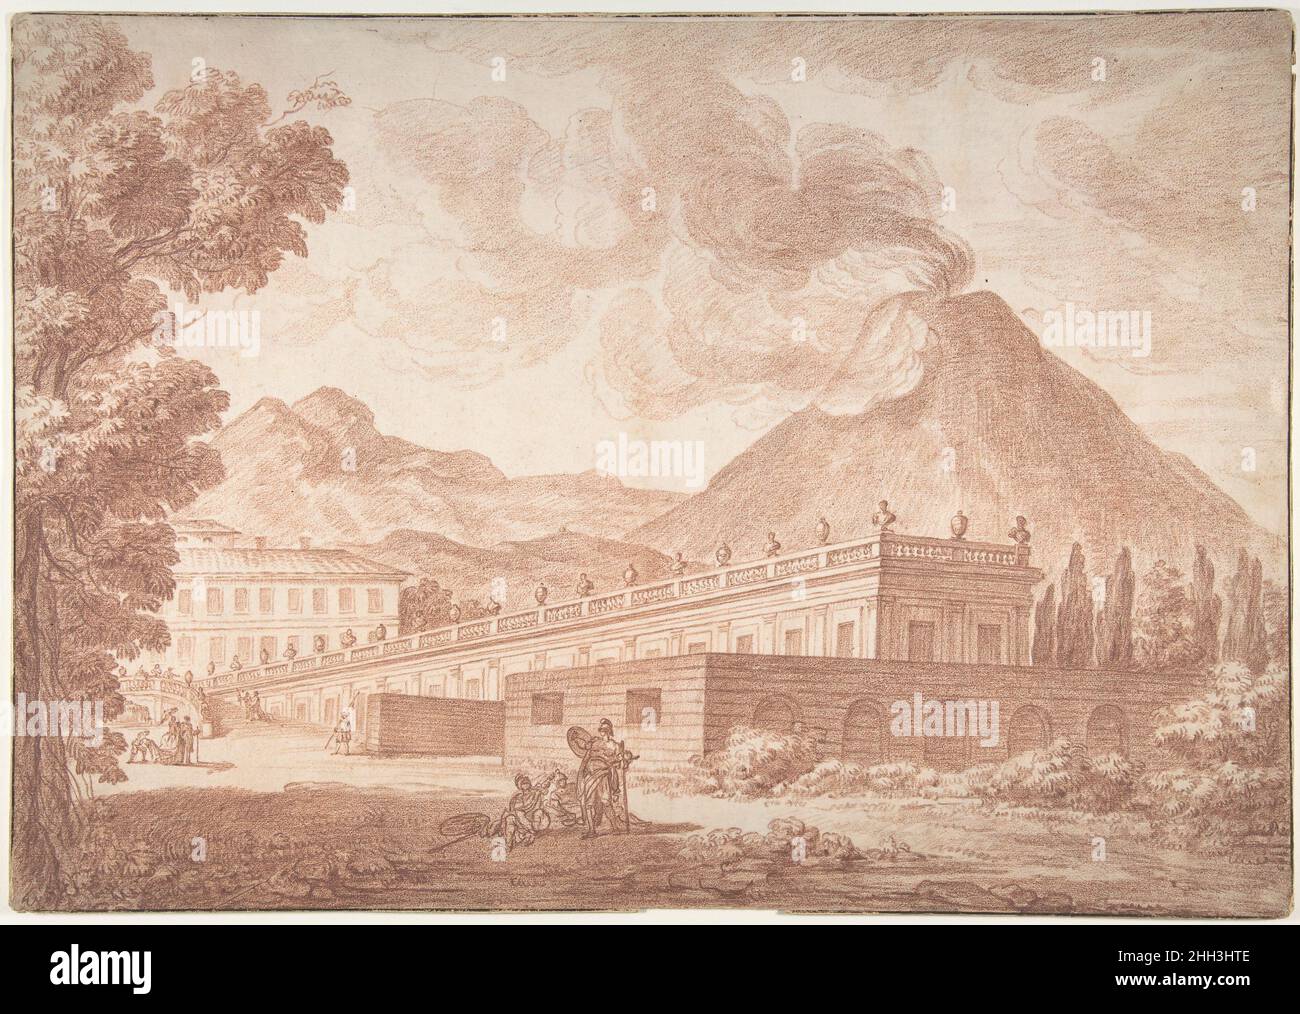 The Palazzo Reale at Pórtici with Vesuvius in the Background n.d. Louis Chaix French. The Palazzo Reale at Pórtici with Vesuvius in the Background  339780 Stock Photo